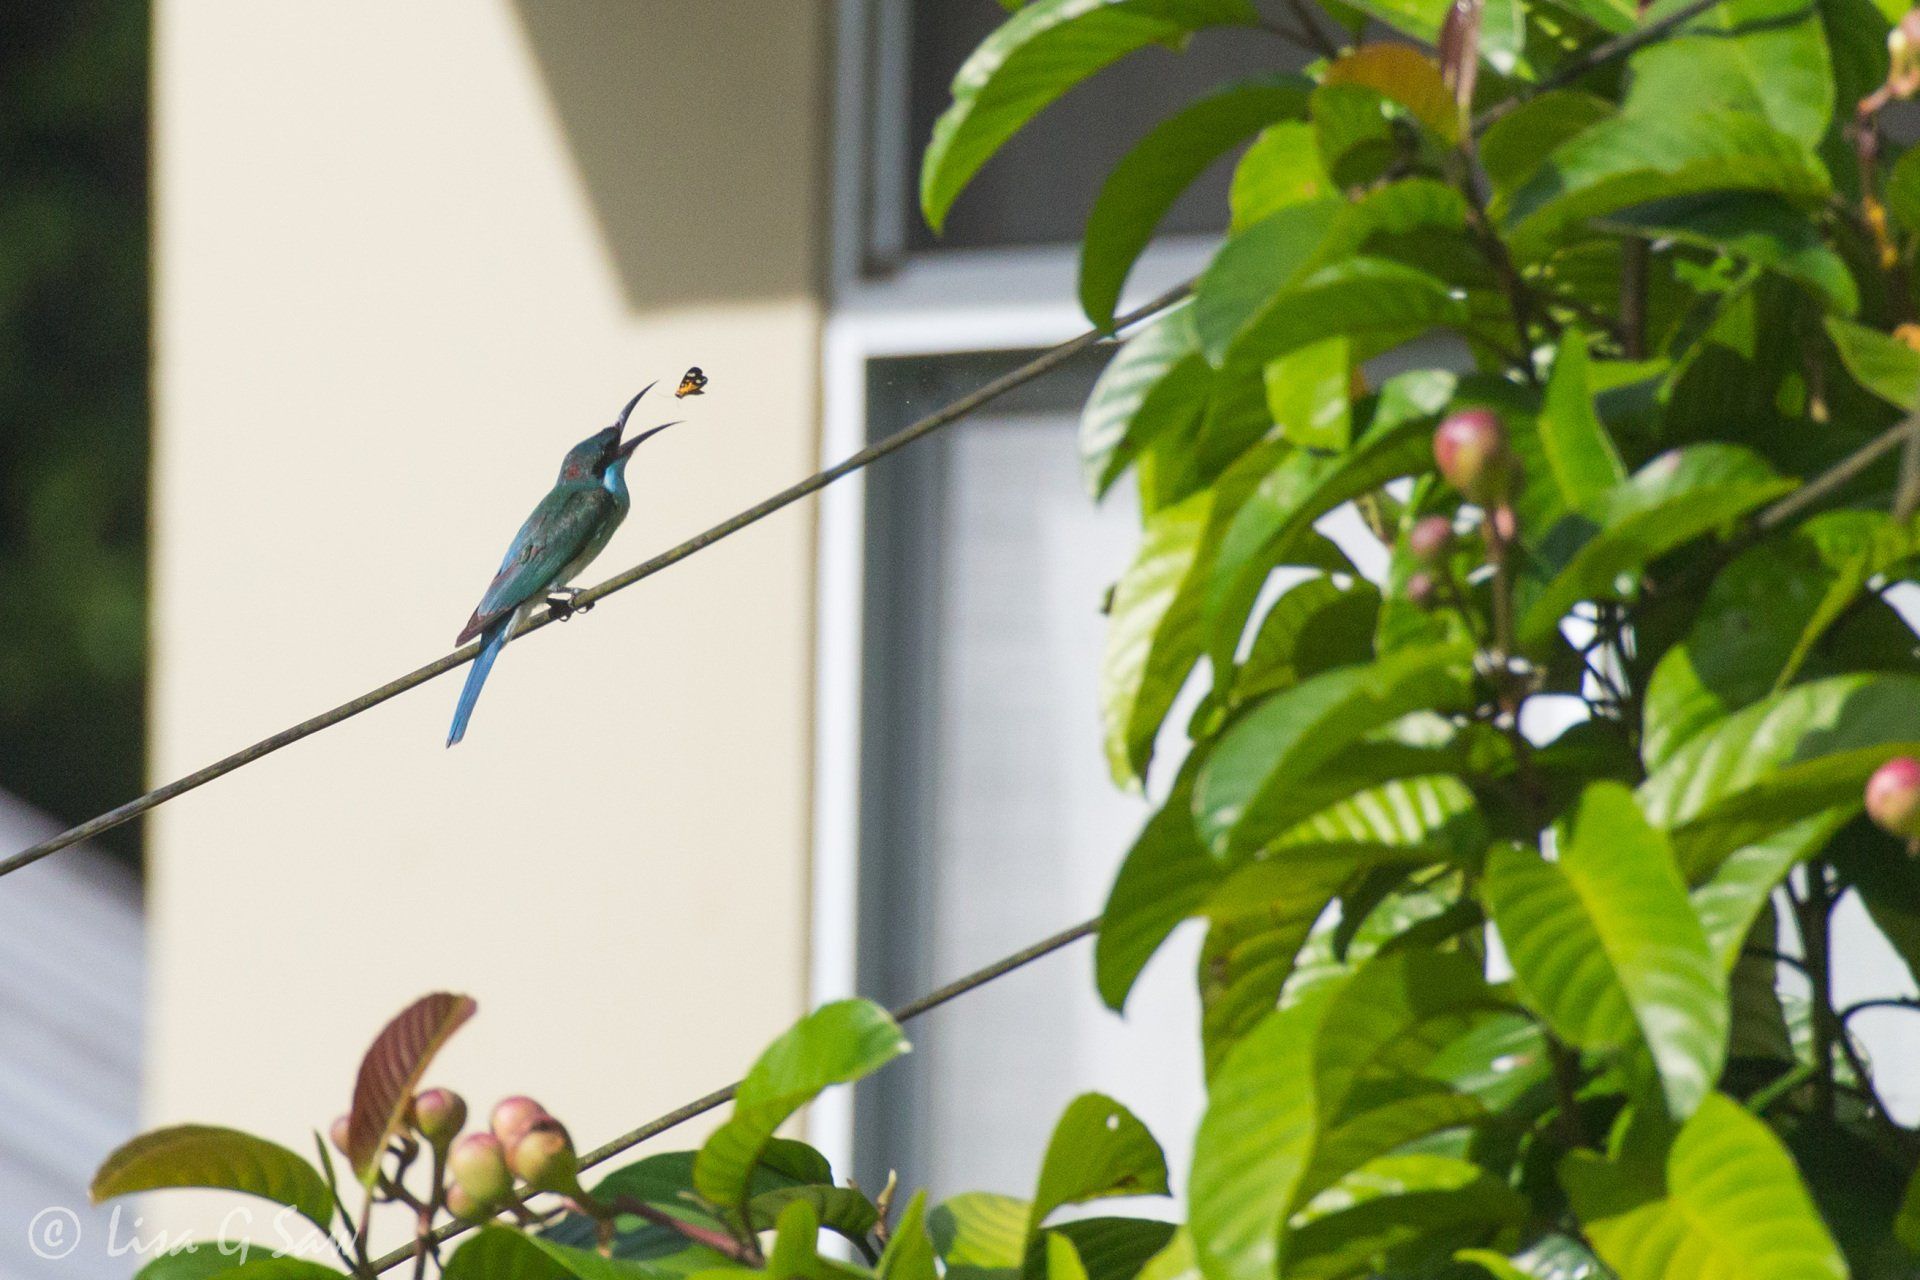 Blue green sunbird on a wire about to eat an insect